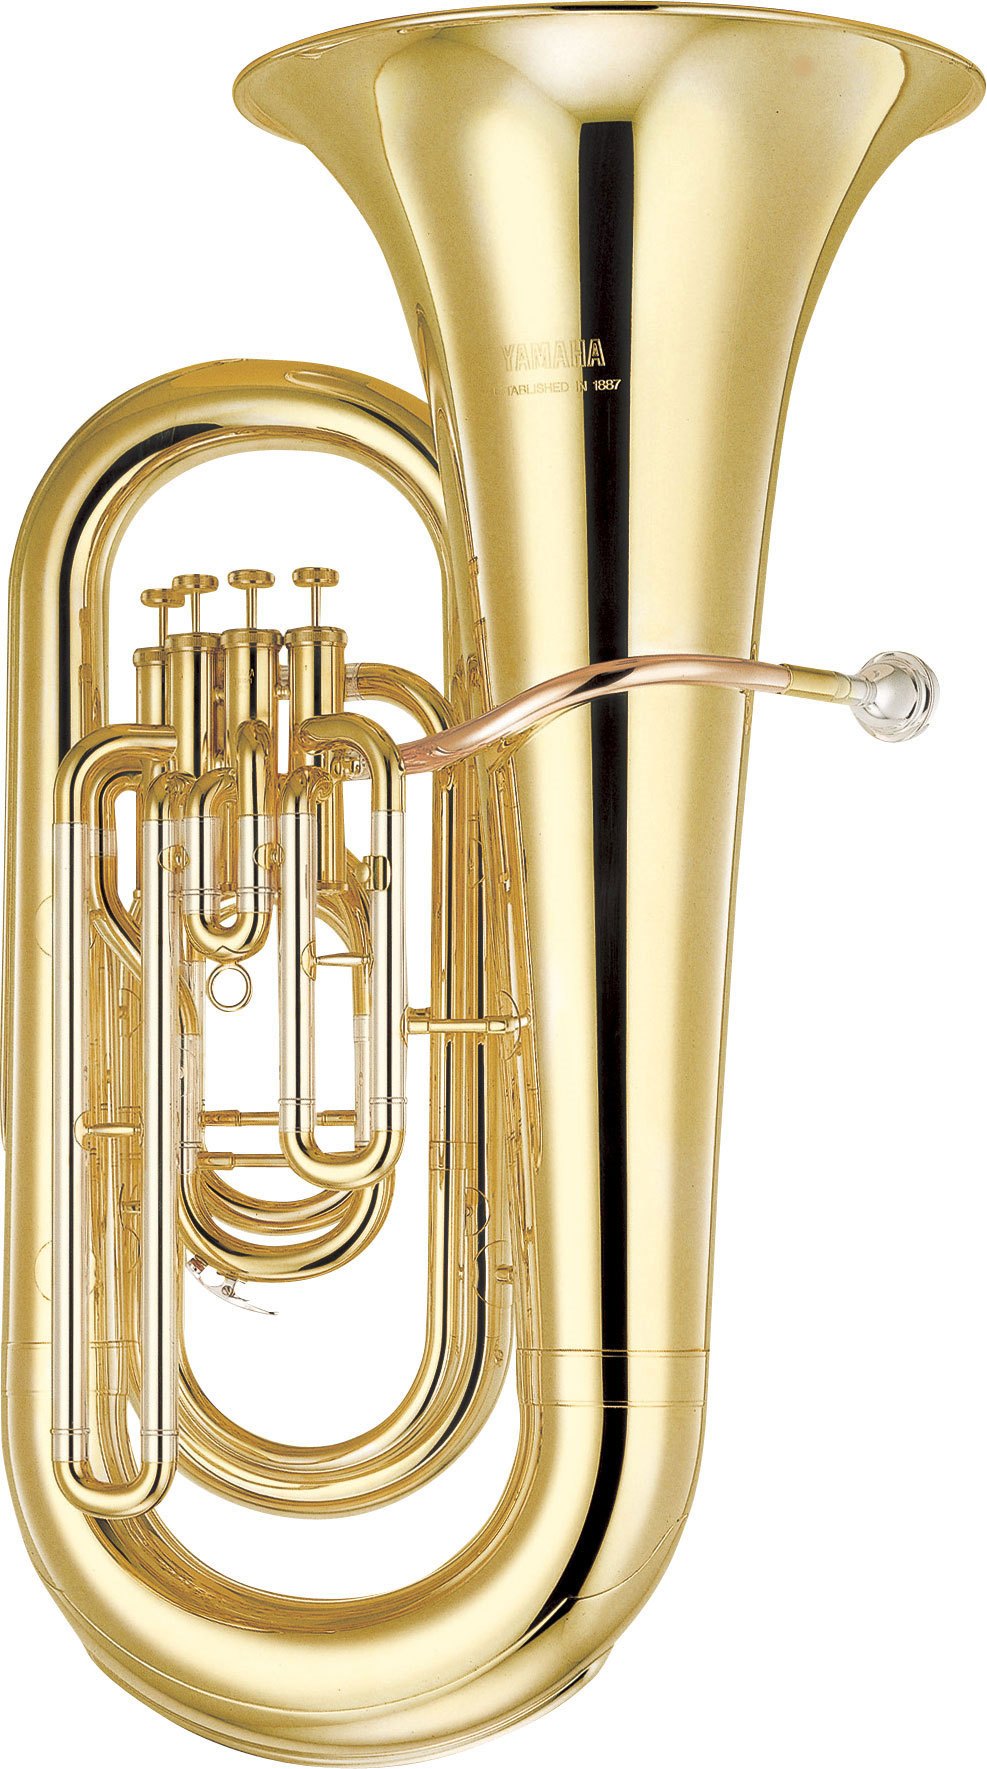 YEB-321S - Overview - Tubas - Brass & Woodwinds - Musical 